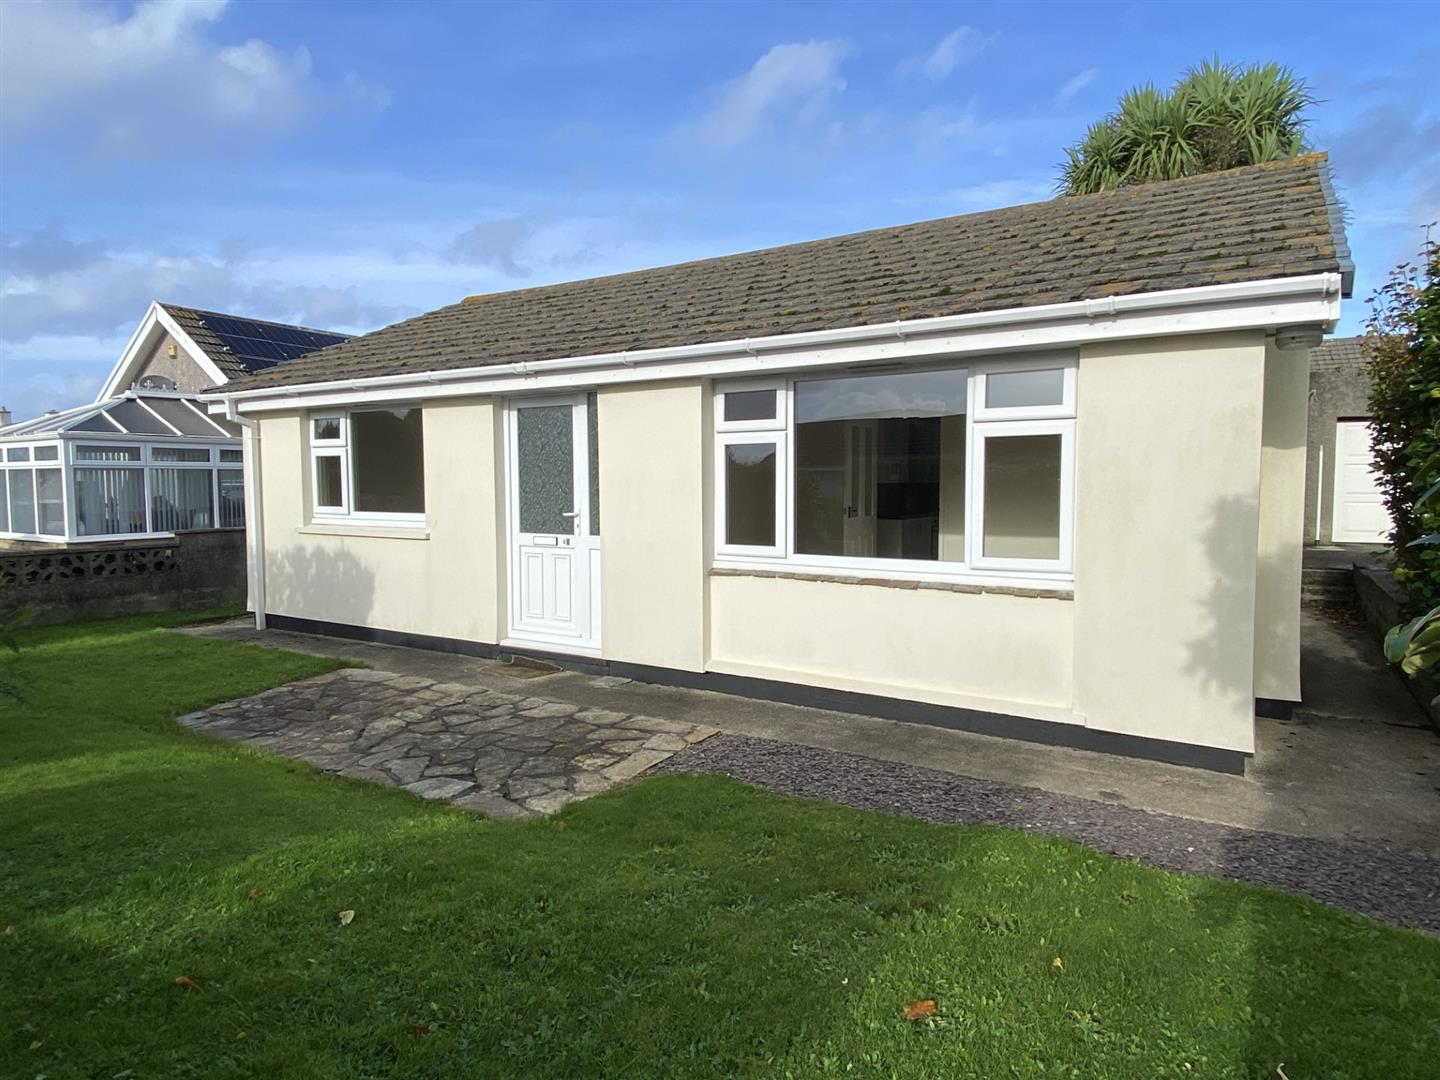 2 bed bungalow to rent in Penware Parc, Camborne - Property Image 1